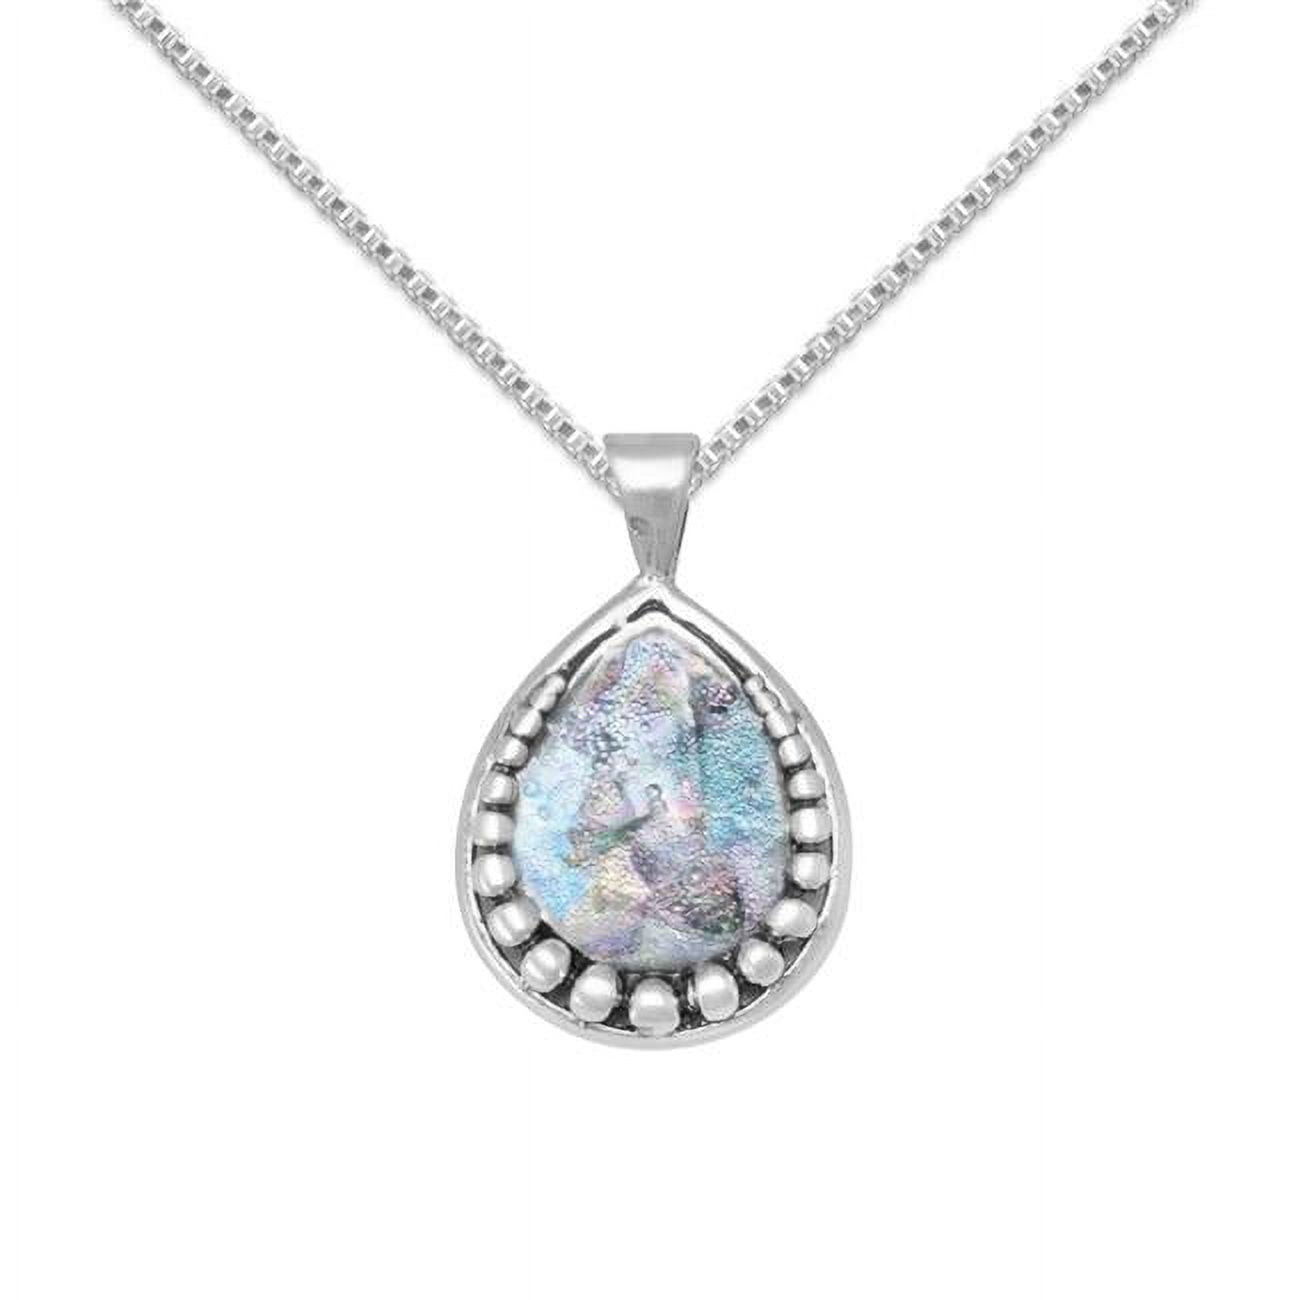 73444-24 24 In. Sterling Silver Pear Shape Roman Glass Pendant With 1.5 Mm Box Chain